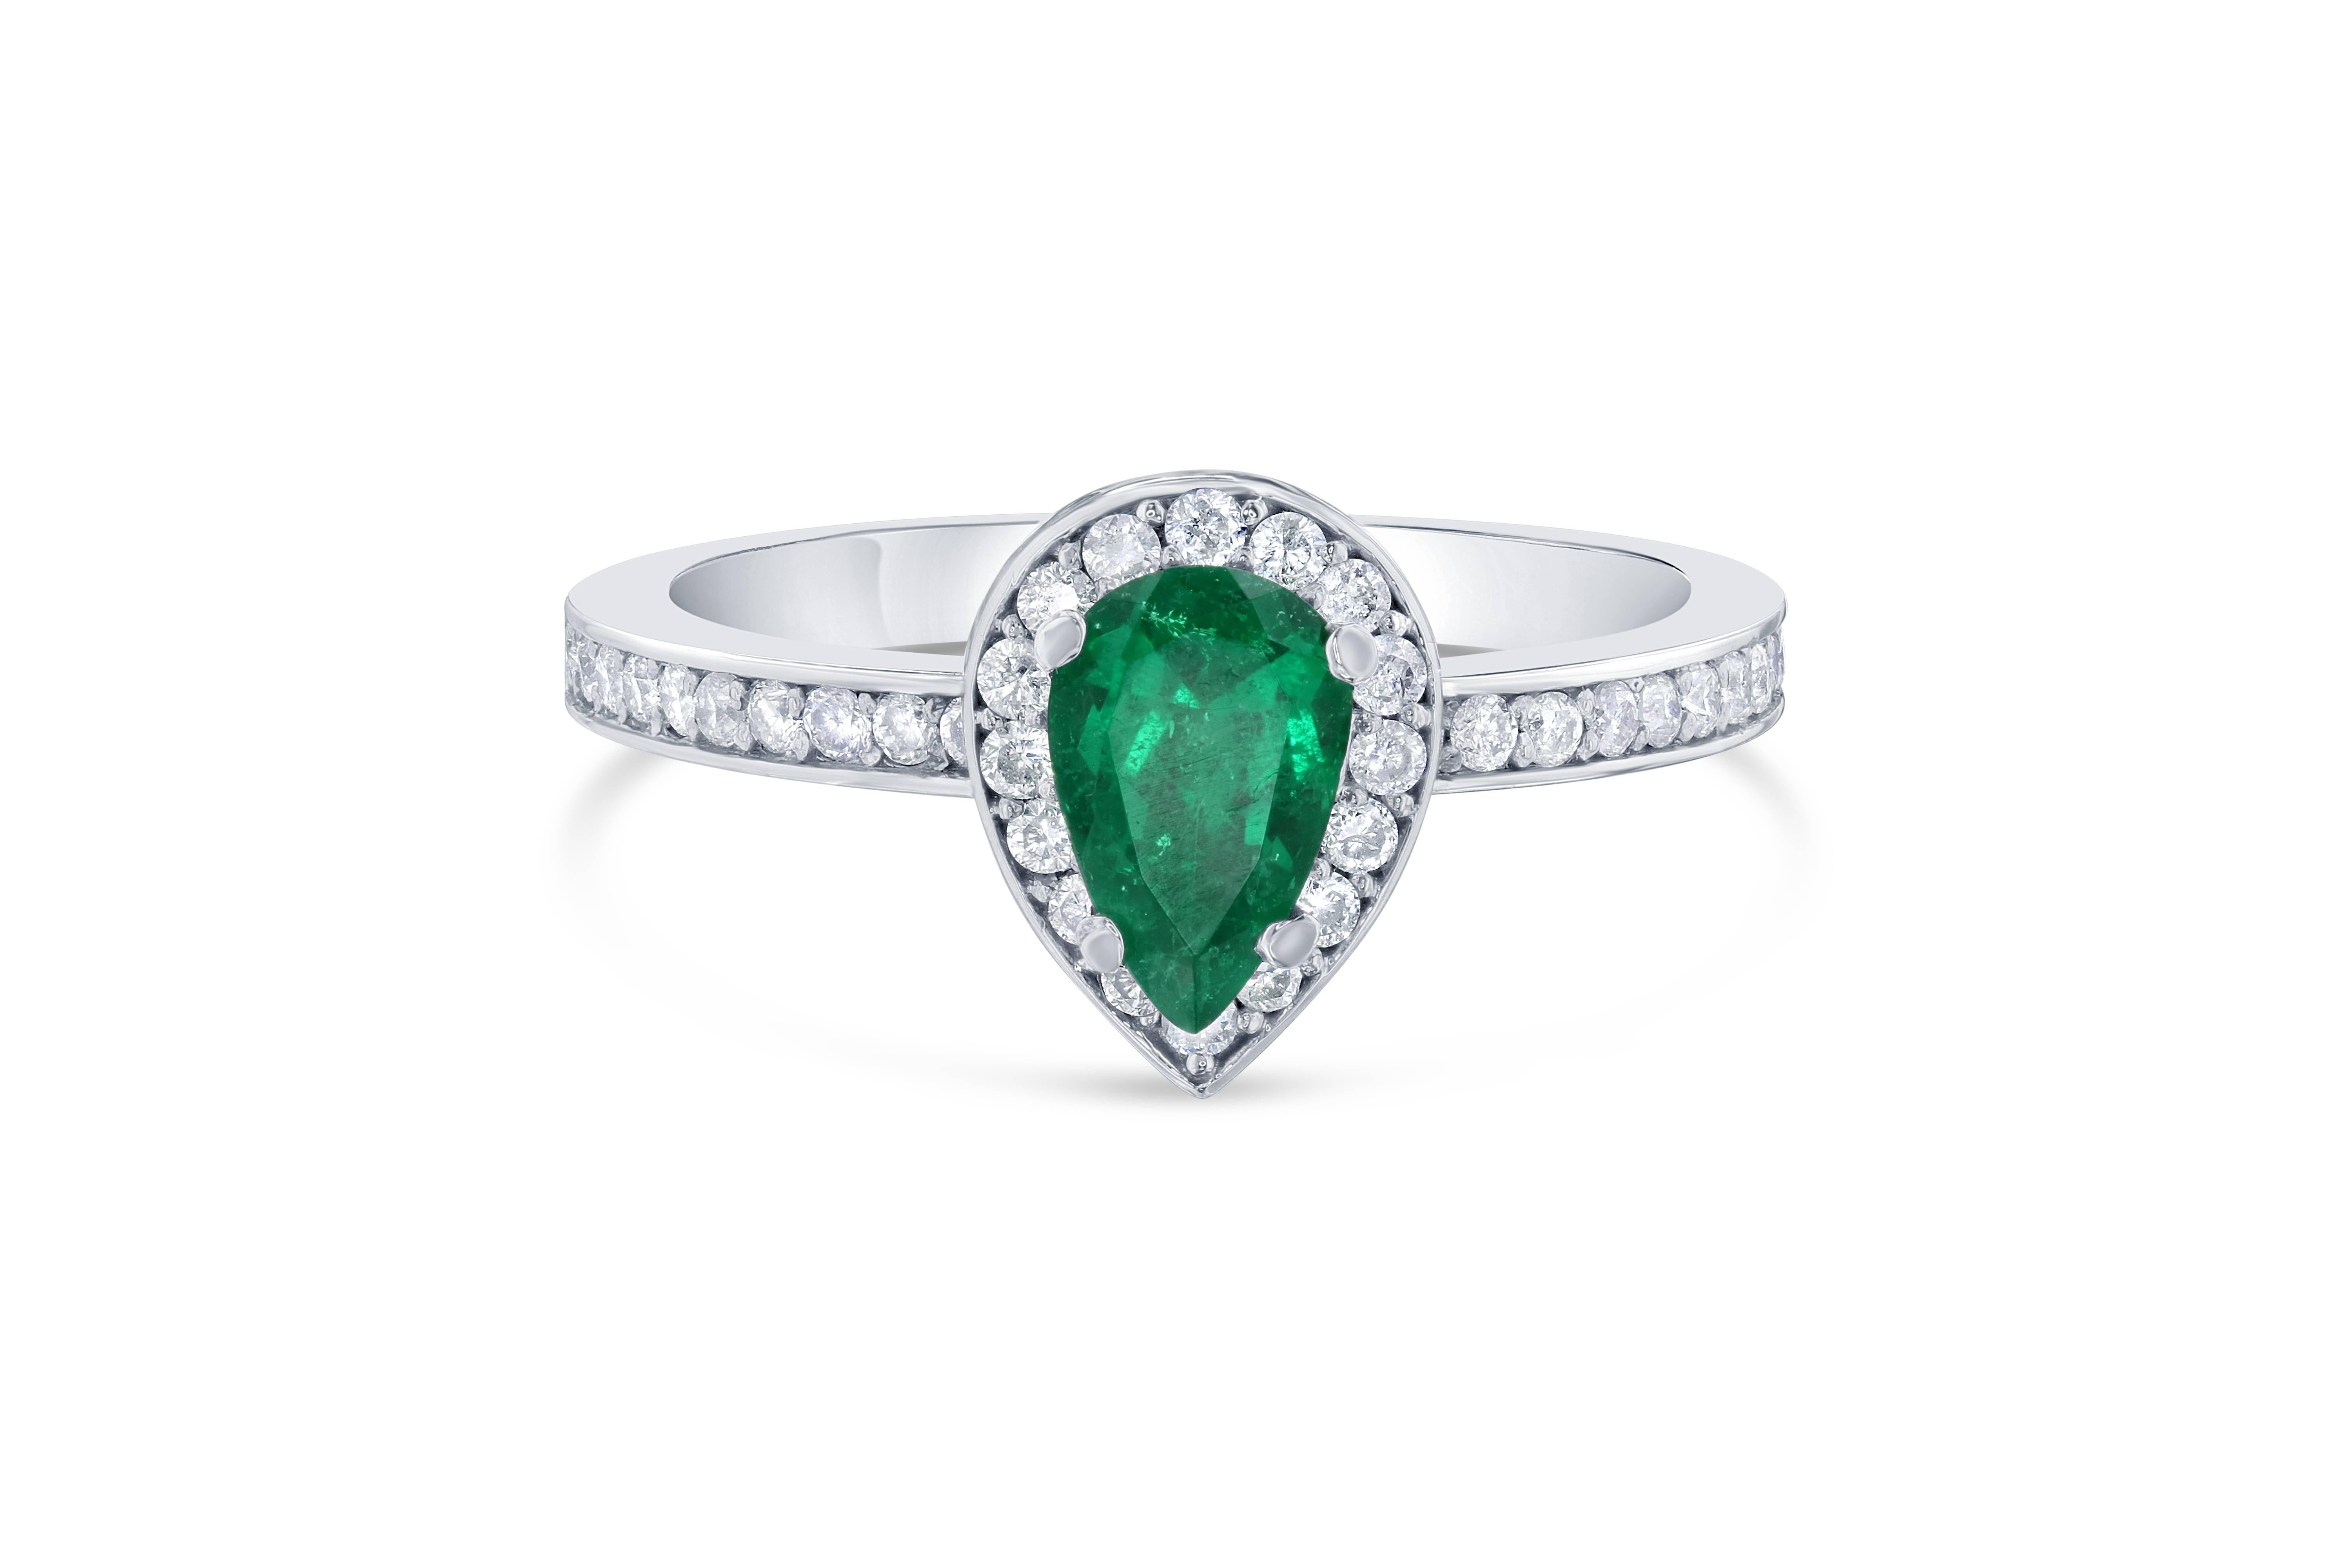 Beautiful, Stunning and Unique! This Pear Cut Emerald Ring will be a gorgeous ring to wear everyday! 
The Emerald is 0.56 Carats and is surrounded by a halo of 37 Round Cut Diamonds weighing 0.20 Carats. 
The total carat weight of the ring is 0.76